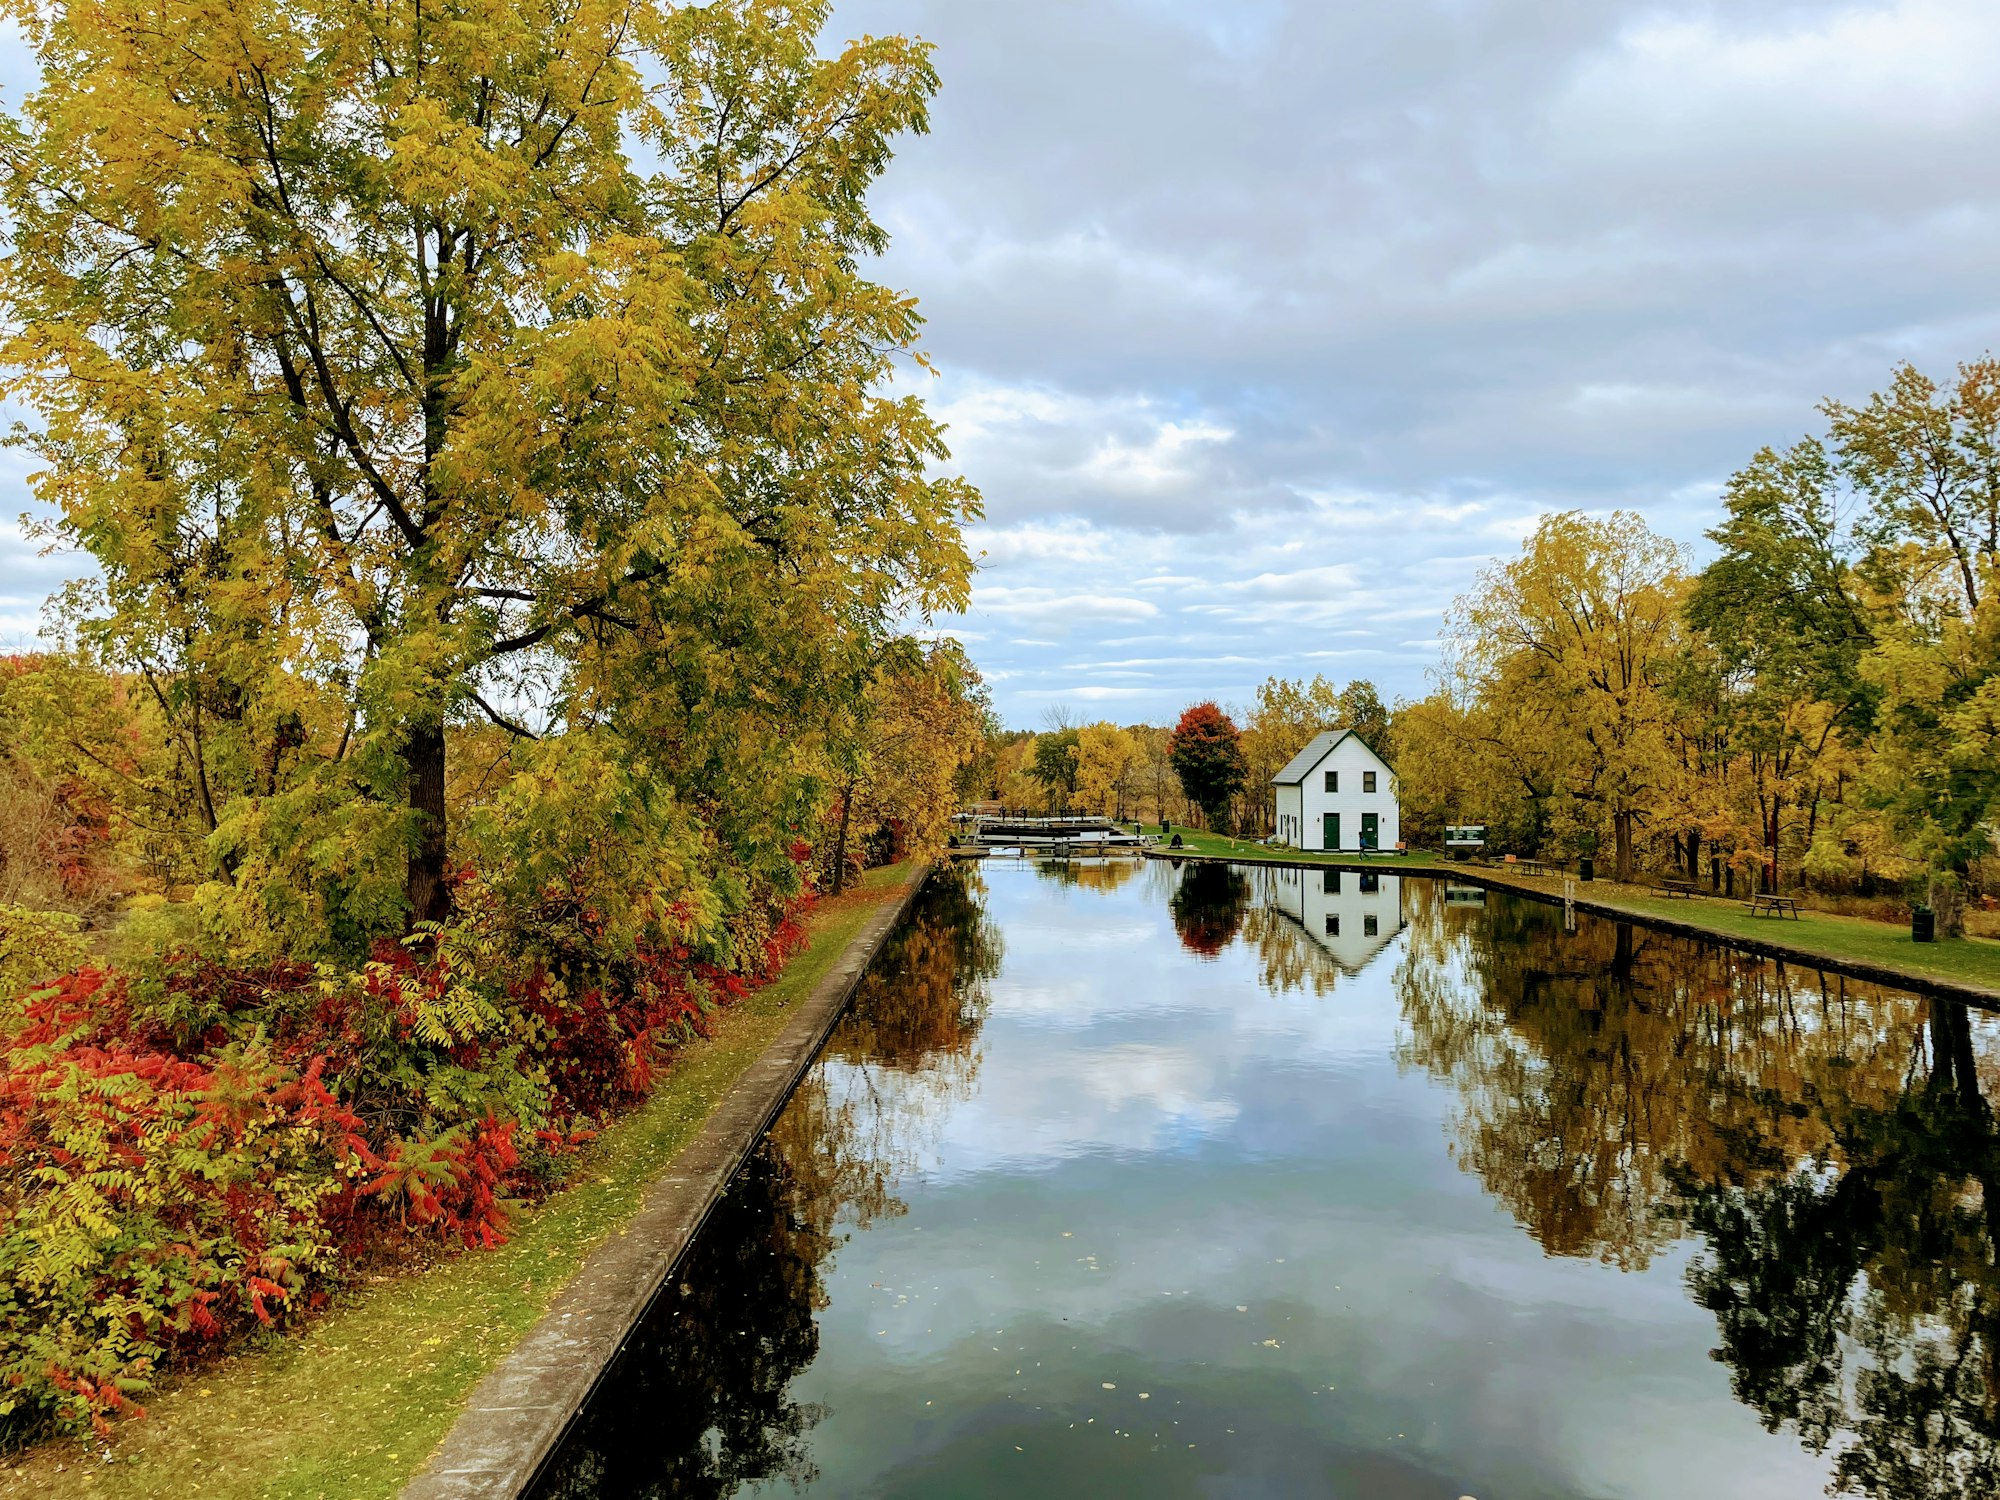 What Makes the Charming Town of Merrickville an Irresistible Tourist Destination?